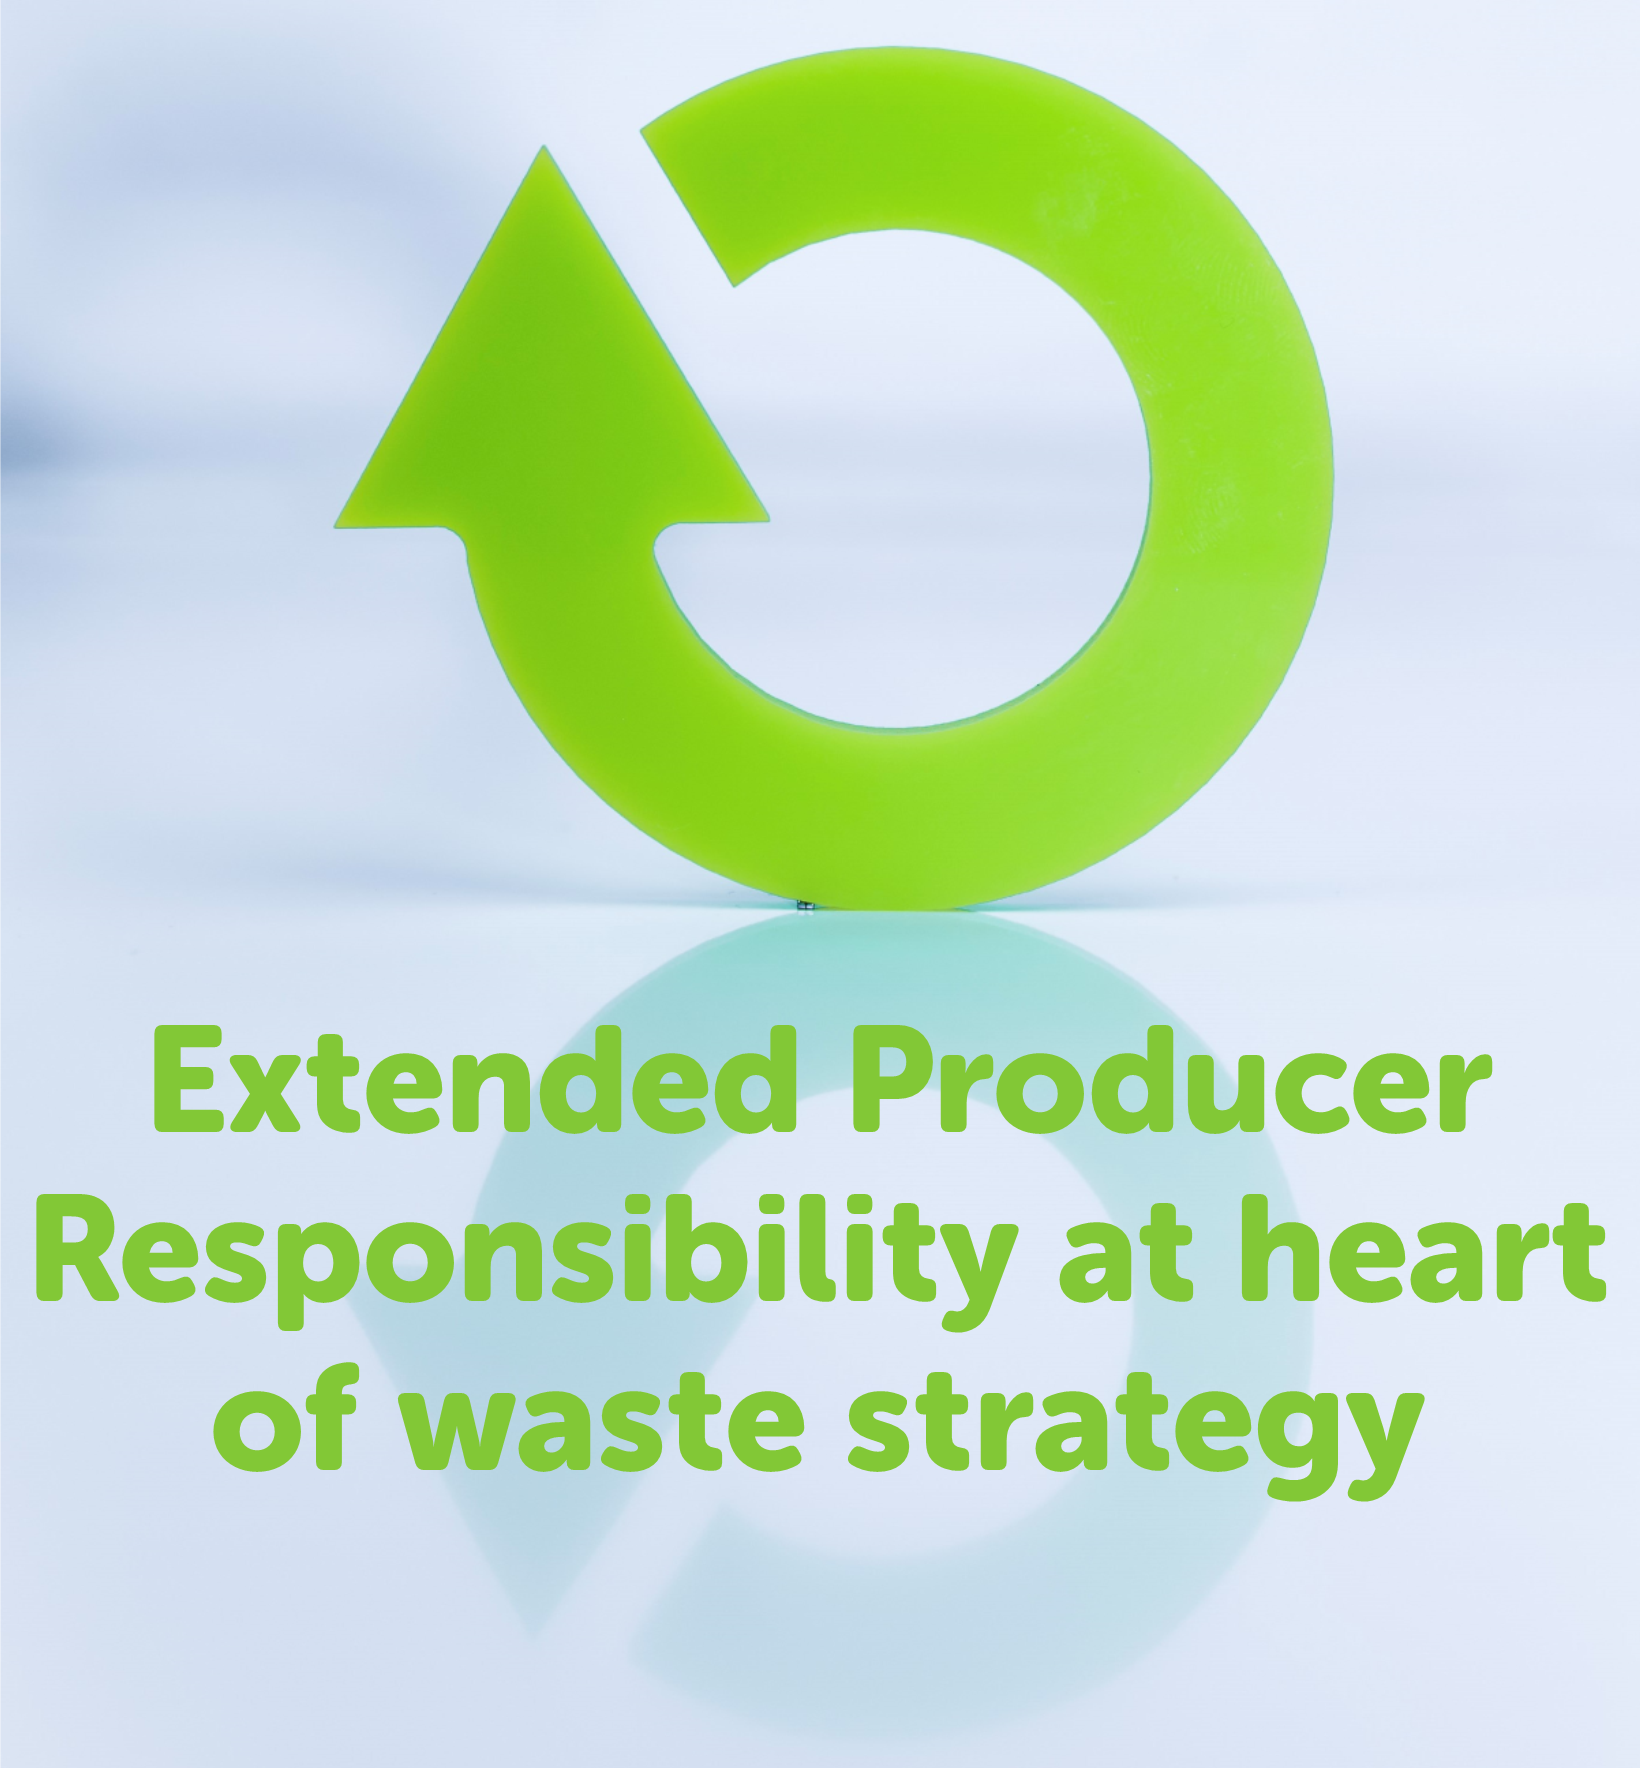 Extended Producer Responsibility at heart of waste strategy